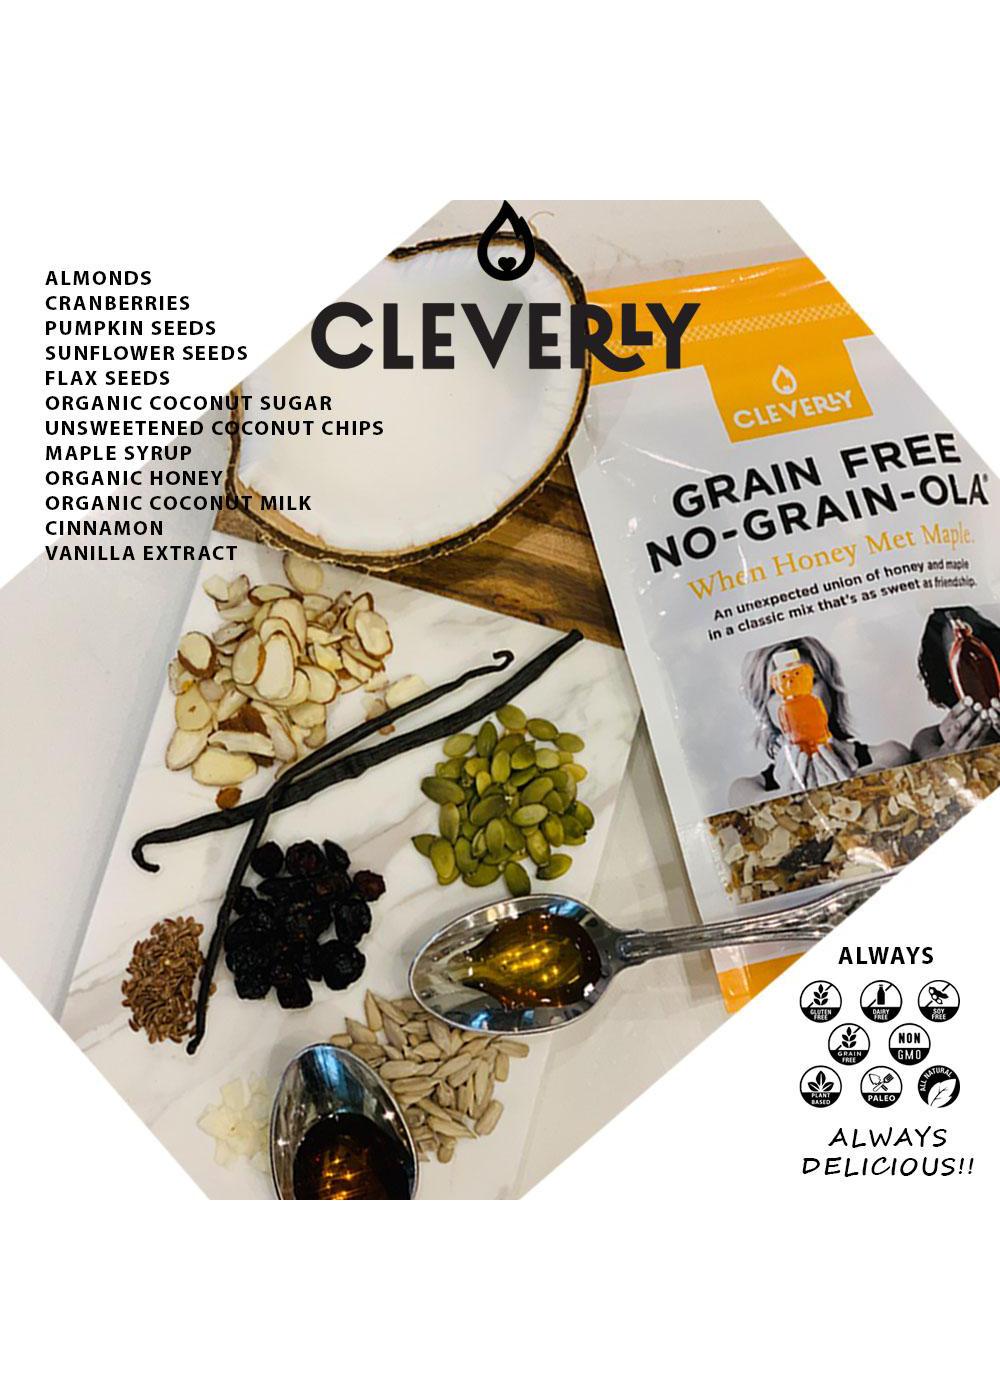 Cleverly Grain-Free No-Grain-Ola - When Honey Met Maple; image 6 of 6